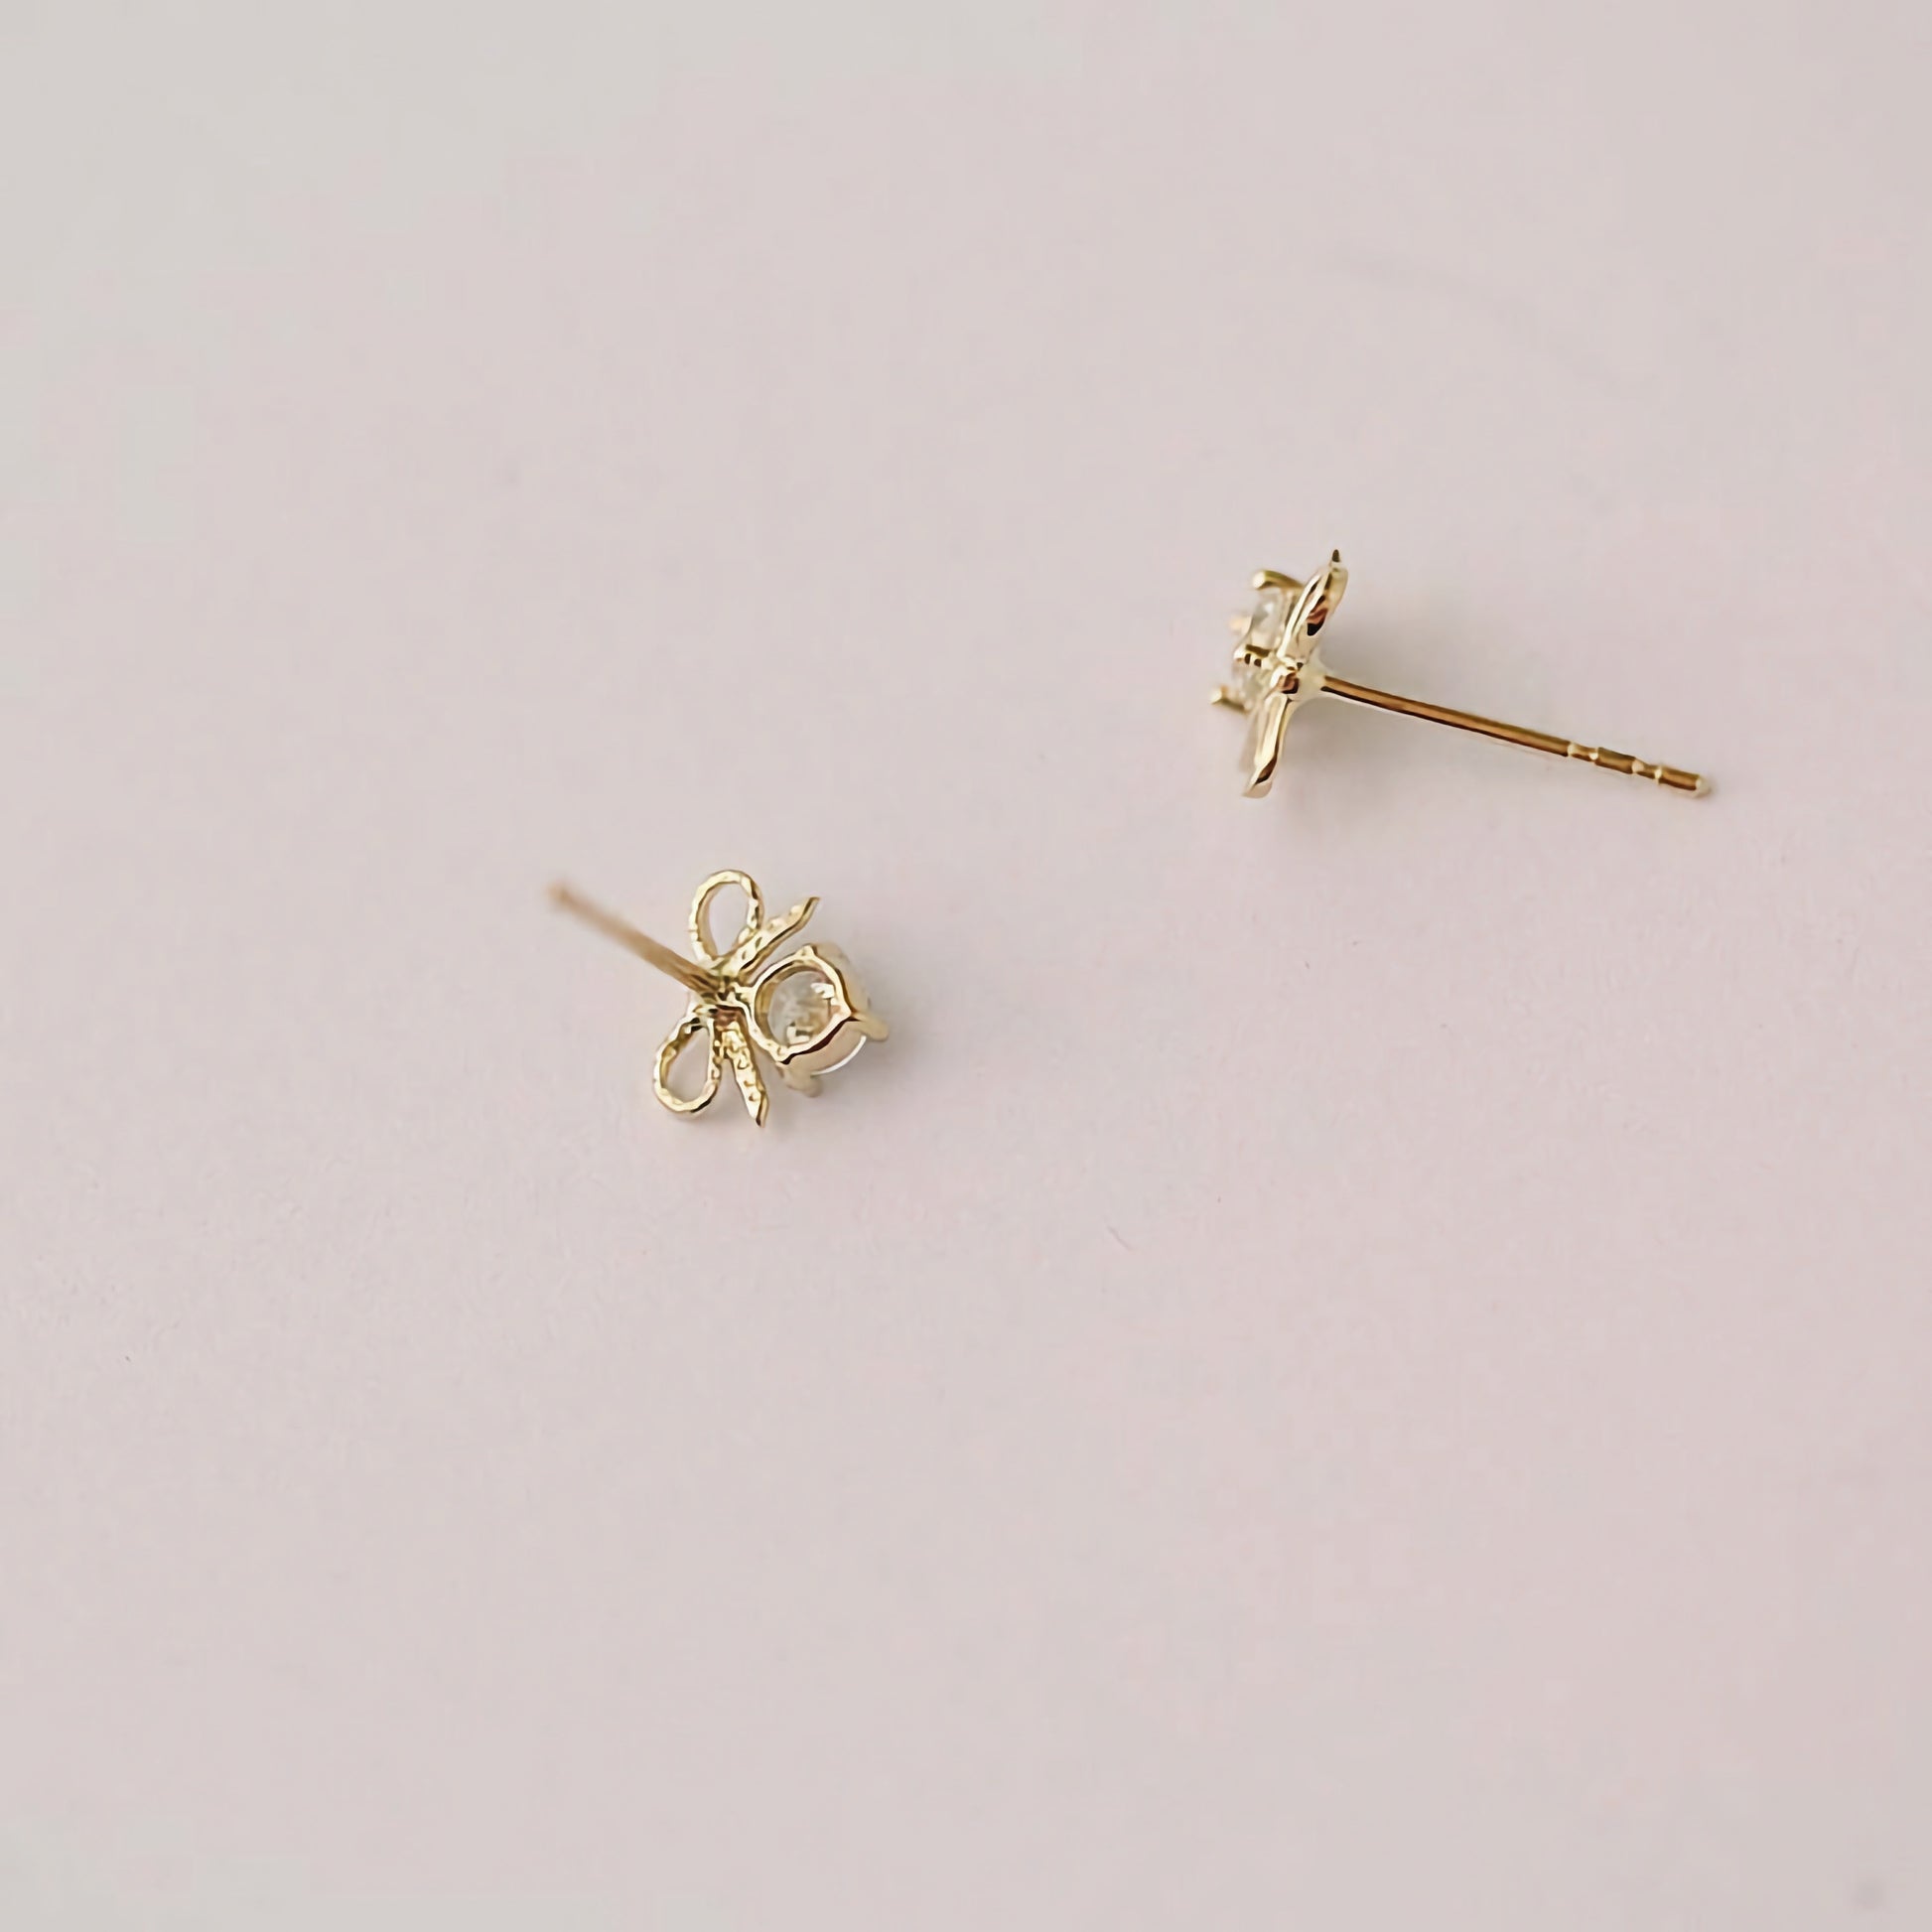 Elevate your style with 9ct Solid Gold Bowtie Hearts Earrings - A timeless and versatile accessory that adds a touch of sophistication to any look.